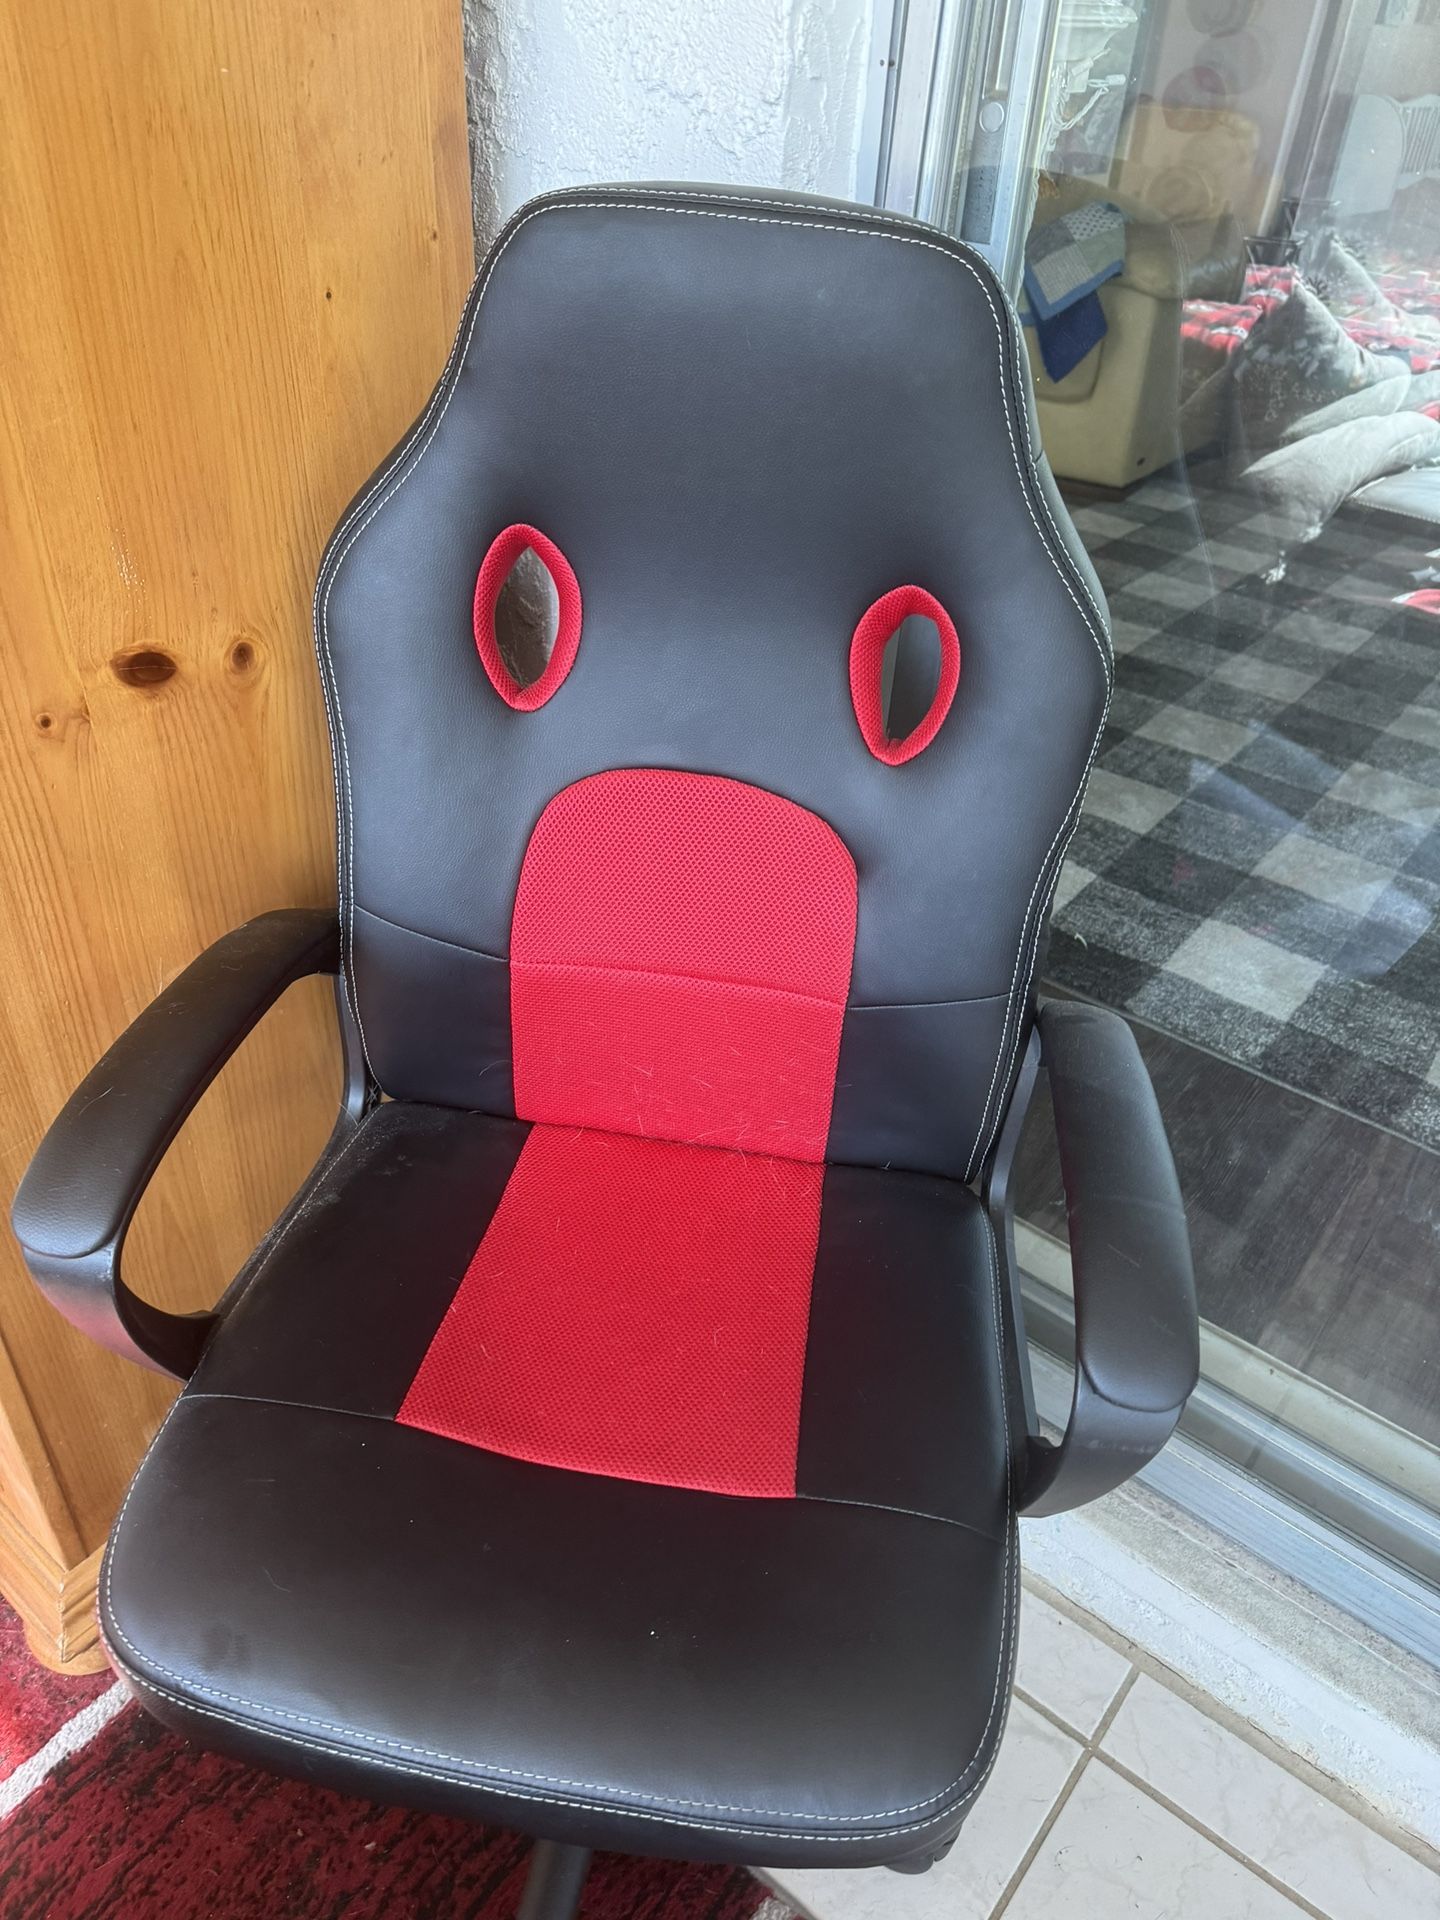 Office/Gaming Chair